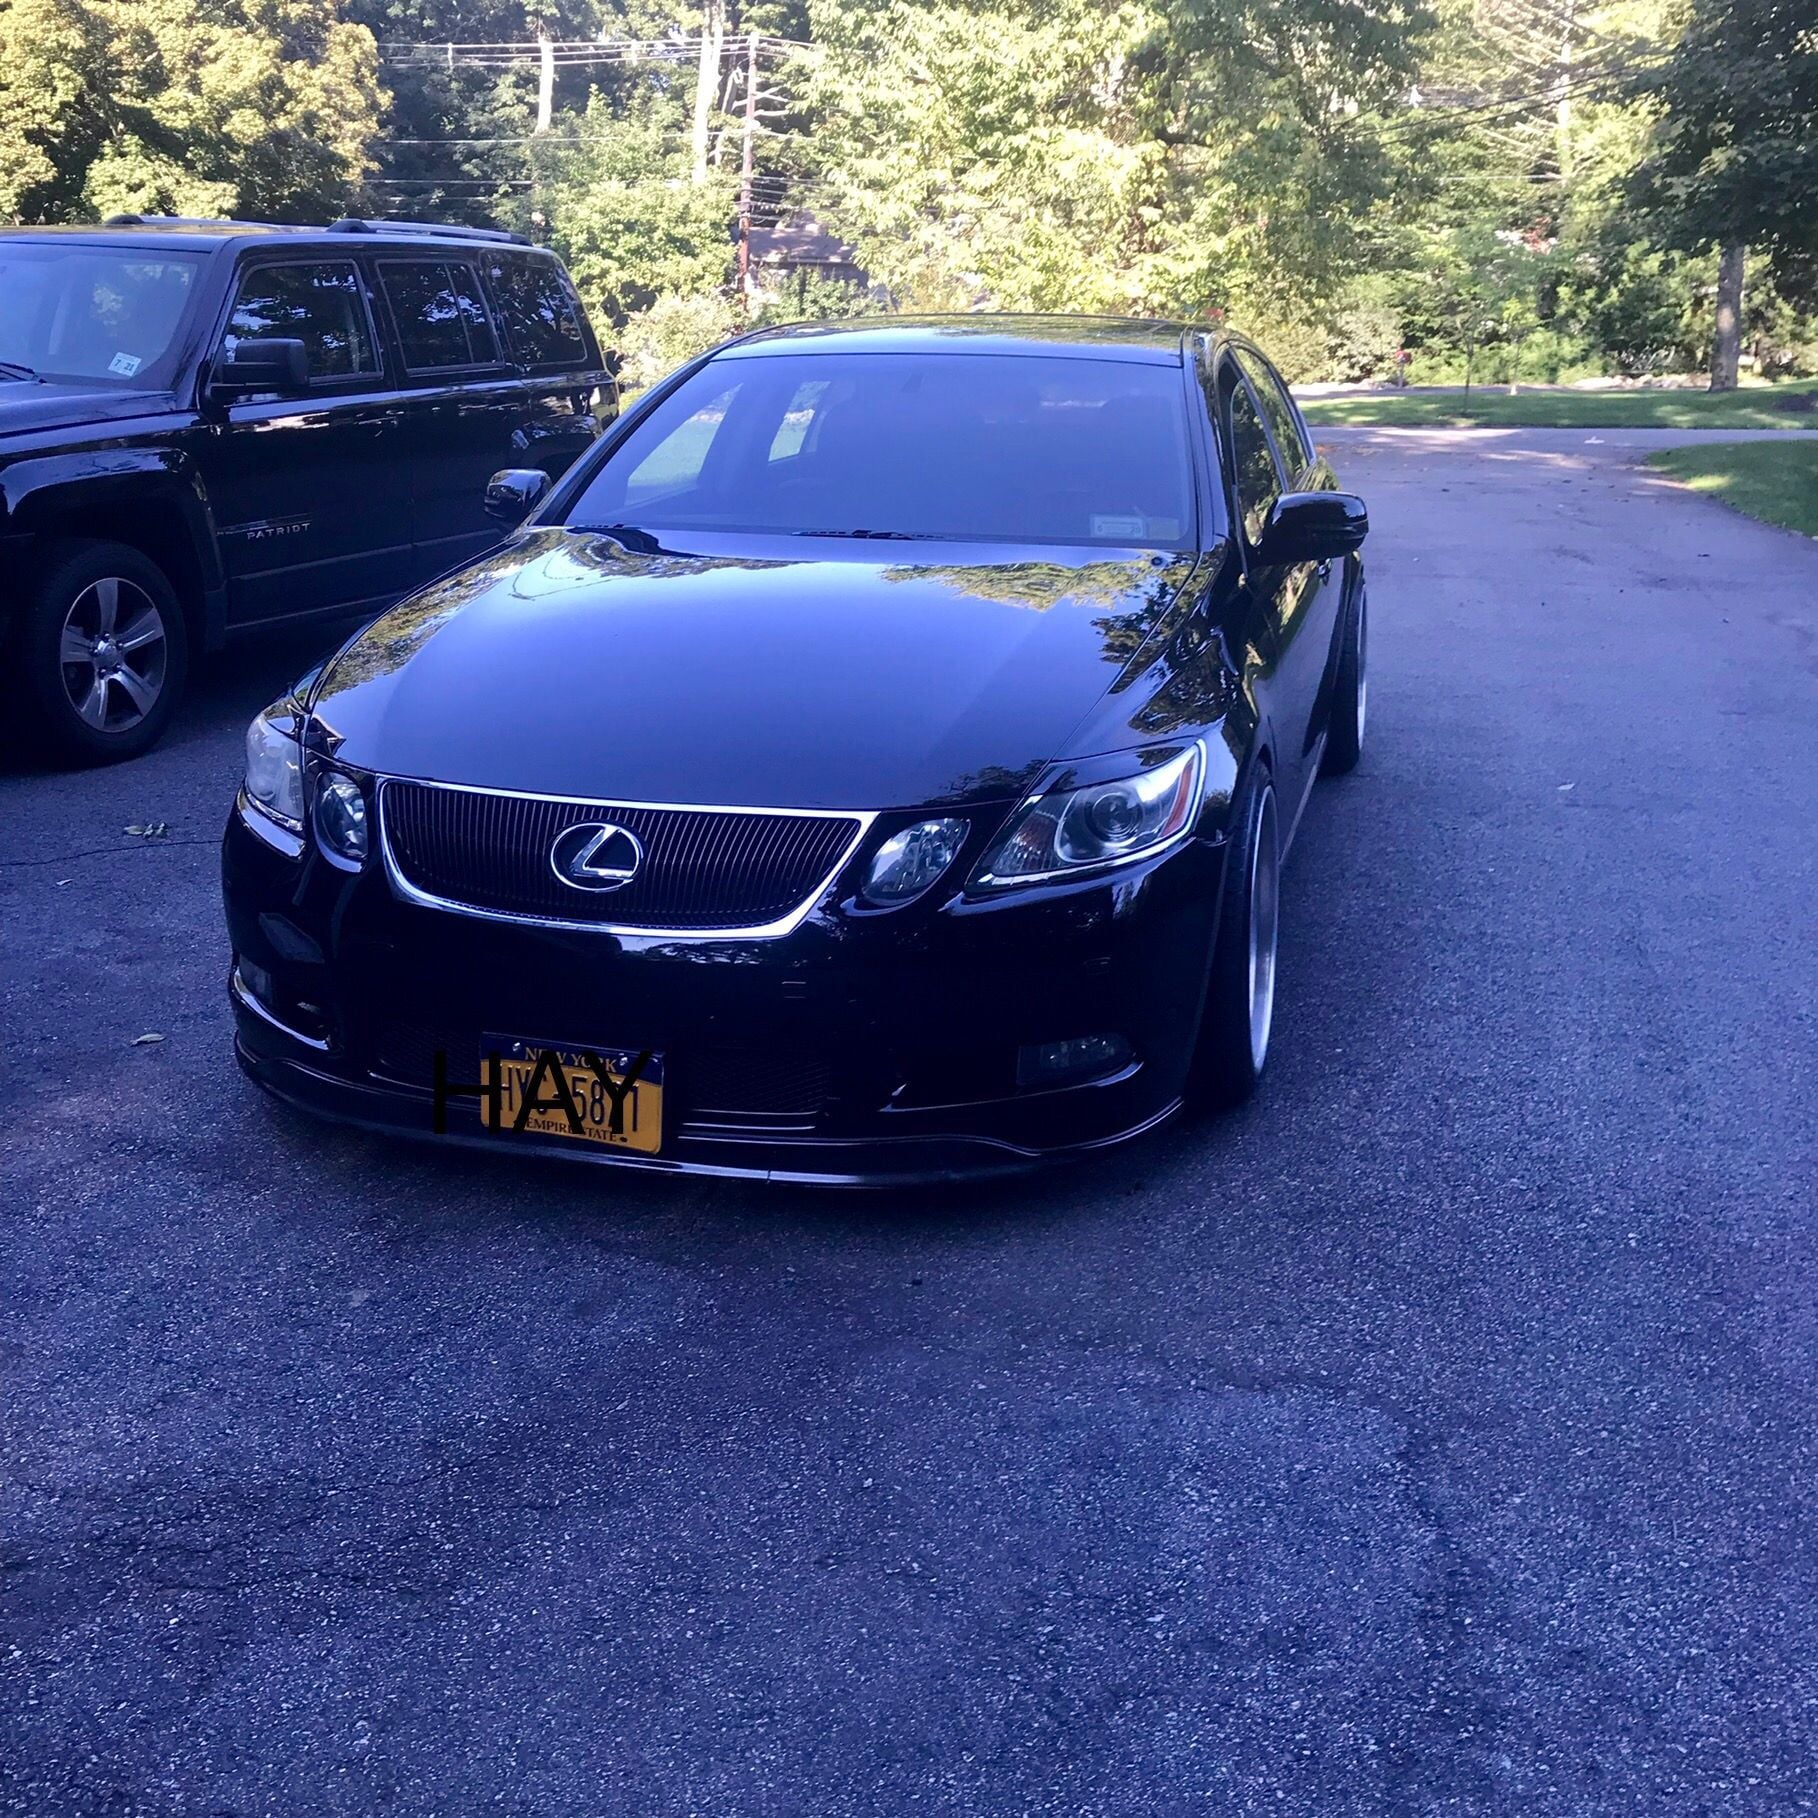 2006 Lexus GS430 - Custom GS430, very well maintained - Used - VIN JTHBN96S165007766 - 115,000 Miles - 8 cyl - 2WD - Automatic - Sedan - Black - White Plains, NY 10604, United States